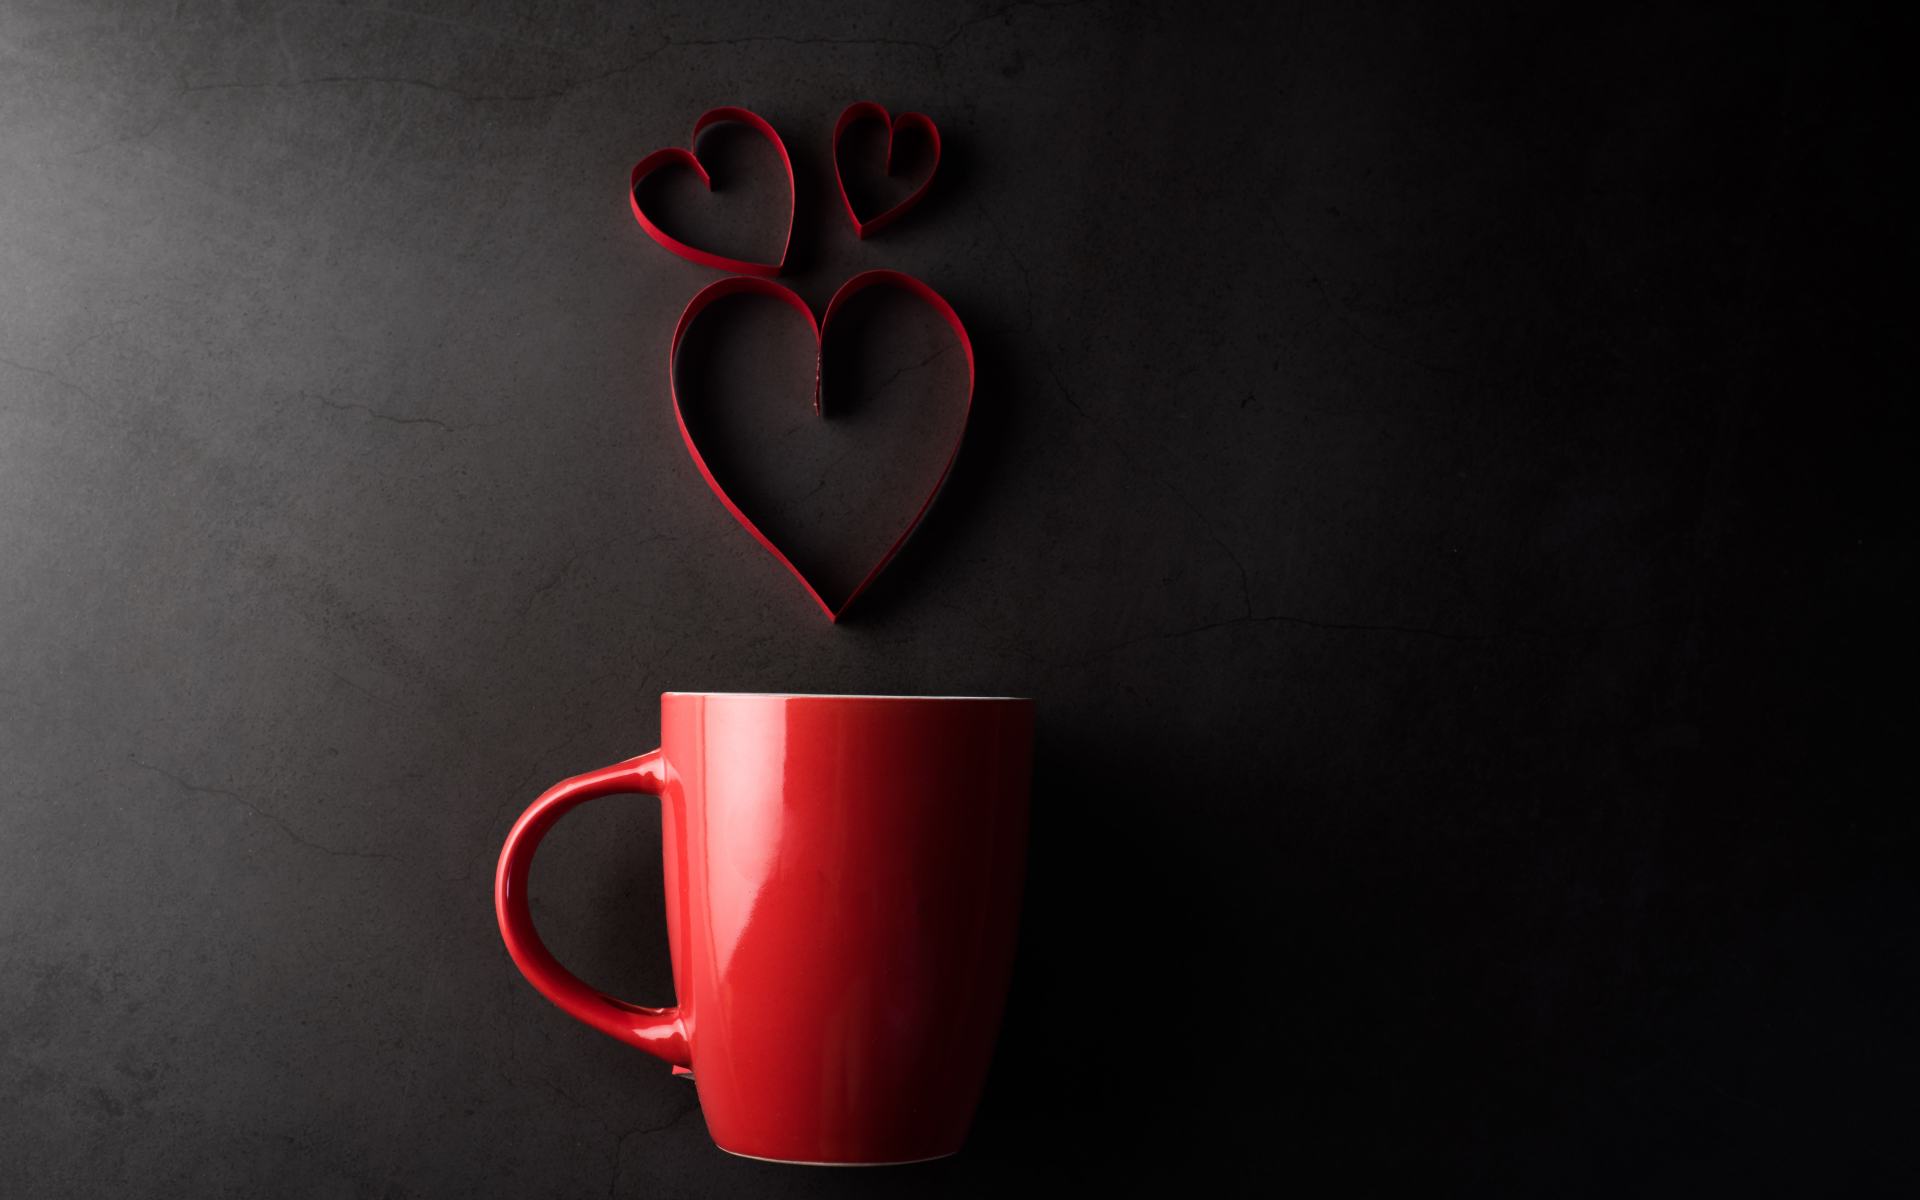 Red cup on a gray background with hearts